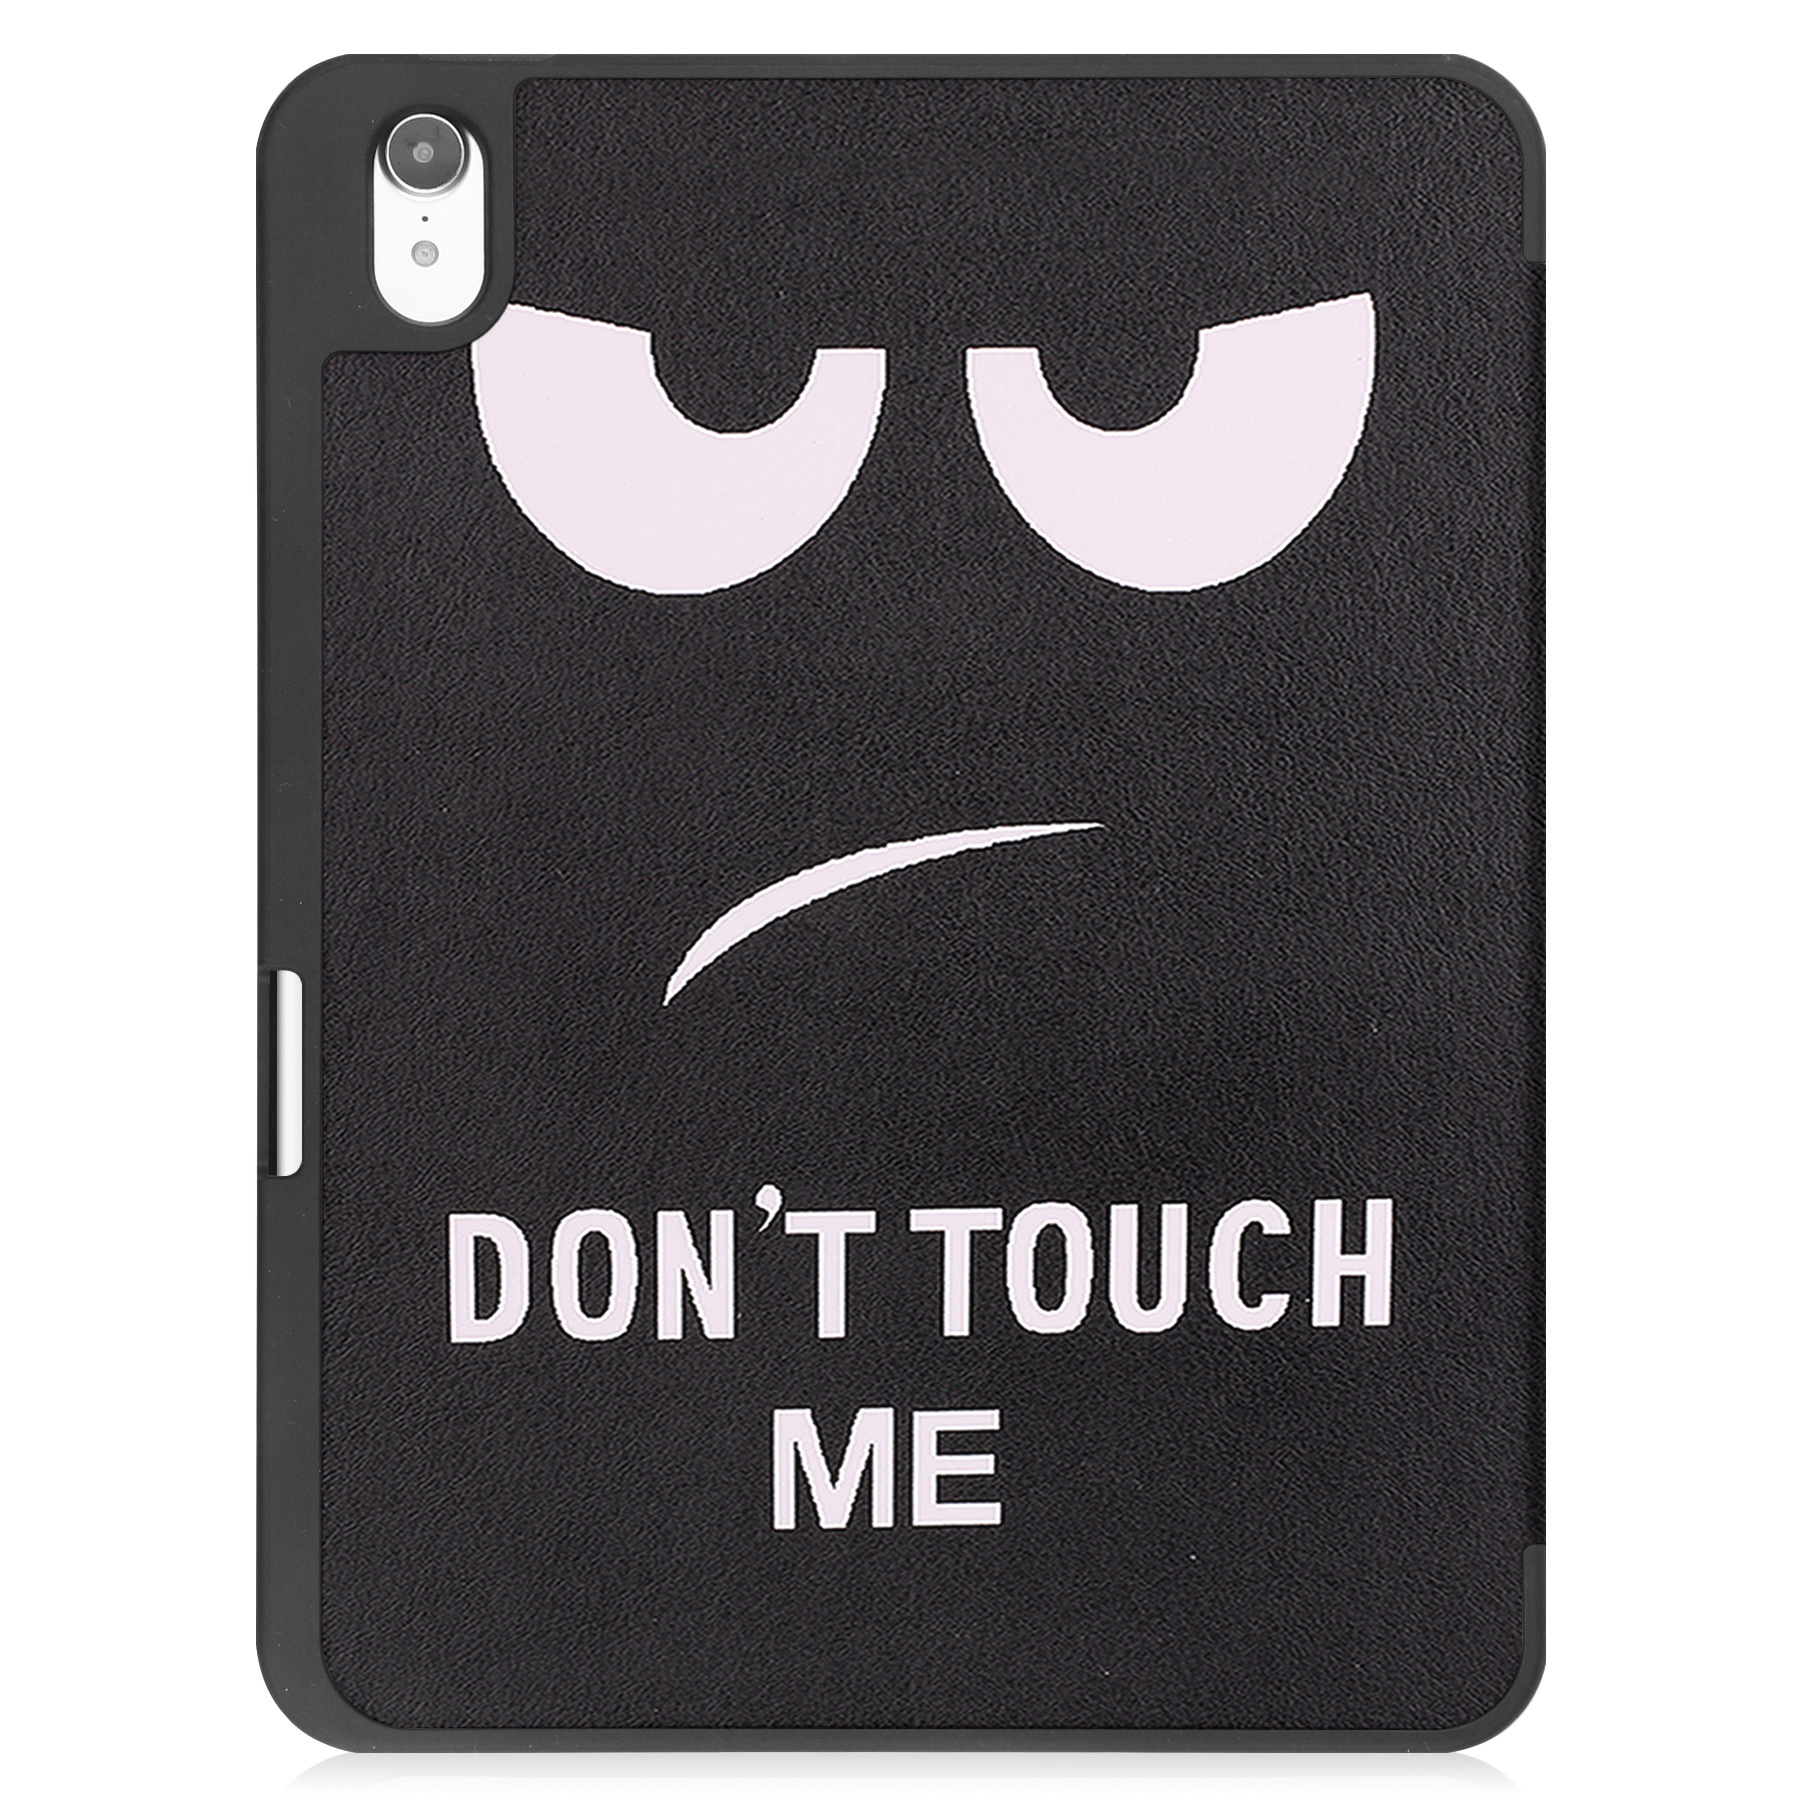 iPad 2022 Hoesje Book Case Hard Cover Hoes Met Uitsparing Apple Pencil Met Screenprotector - iPad 10 Hoes Hardcover - Don't Touch Me